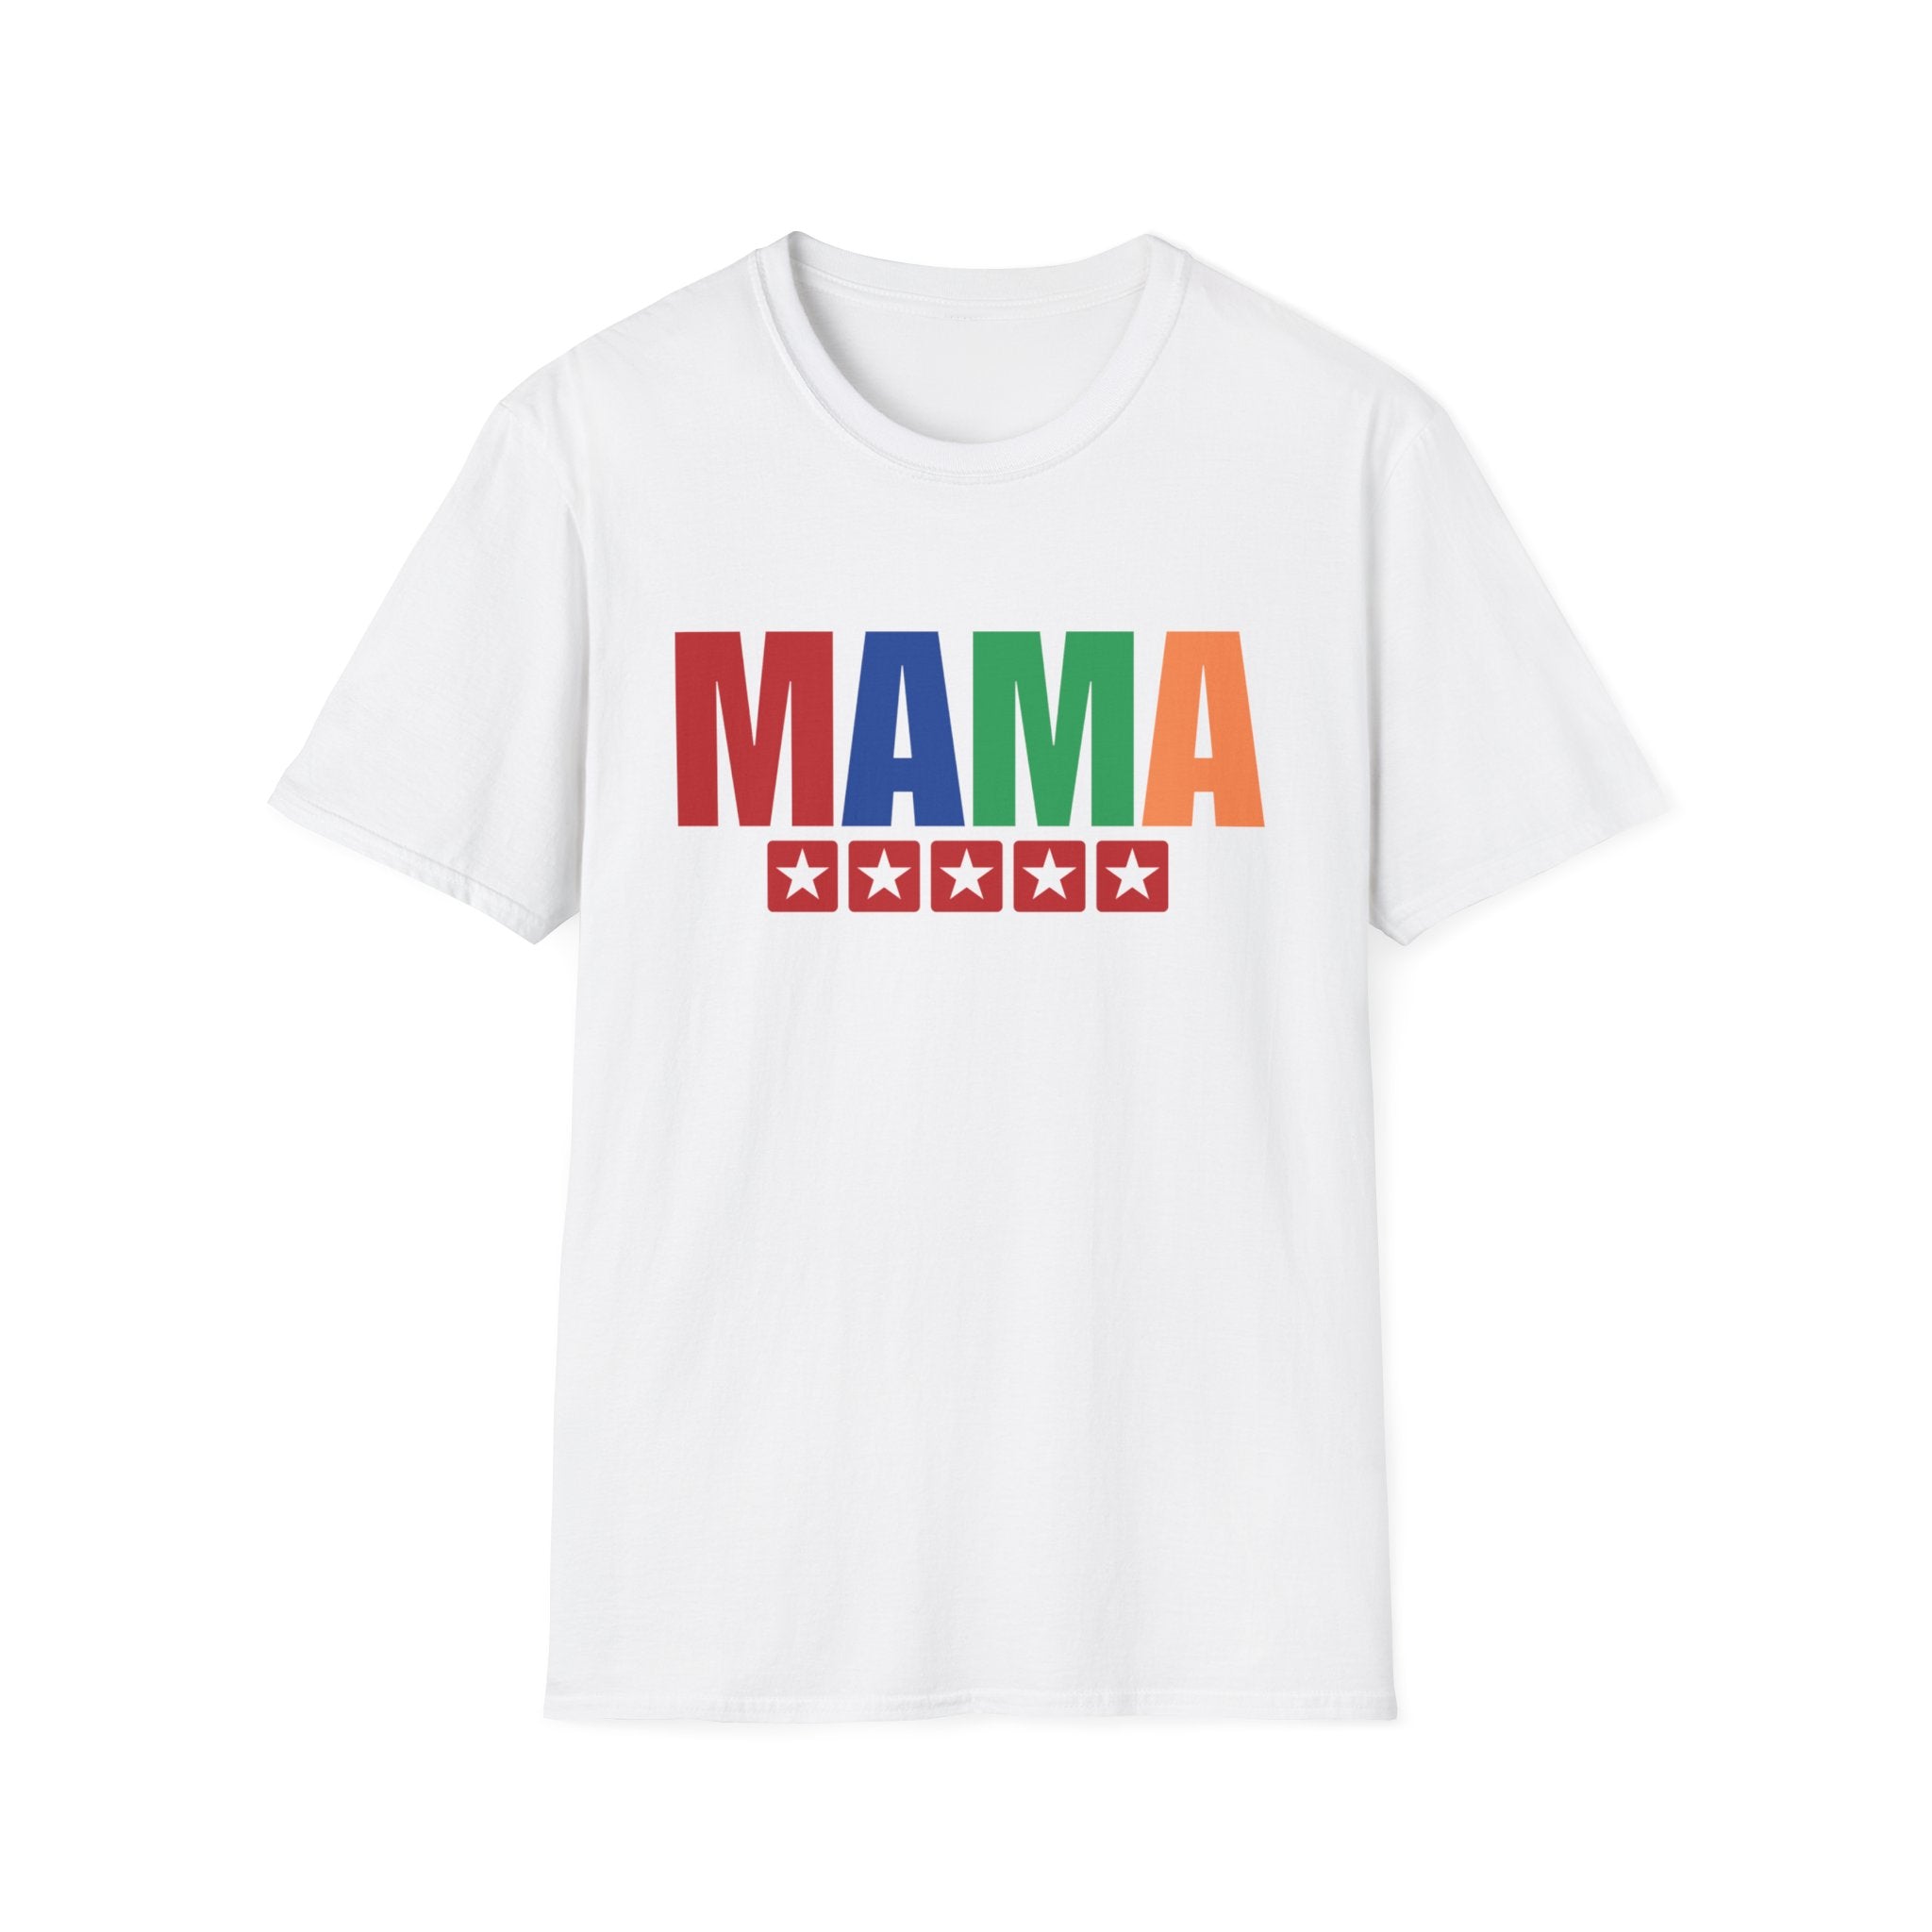 Happy Mother's Day Five Stars Unisex Softstyle T-Shirt, Best Gift for Mom, Best Mom Gift, Mom's Shirt, Best Mom's Shirt